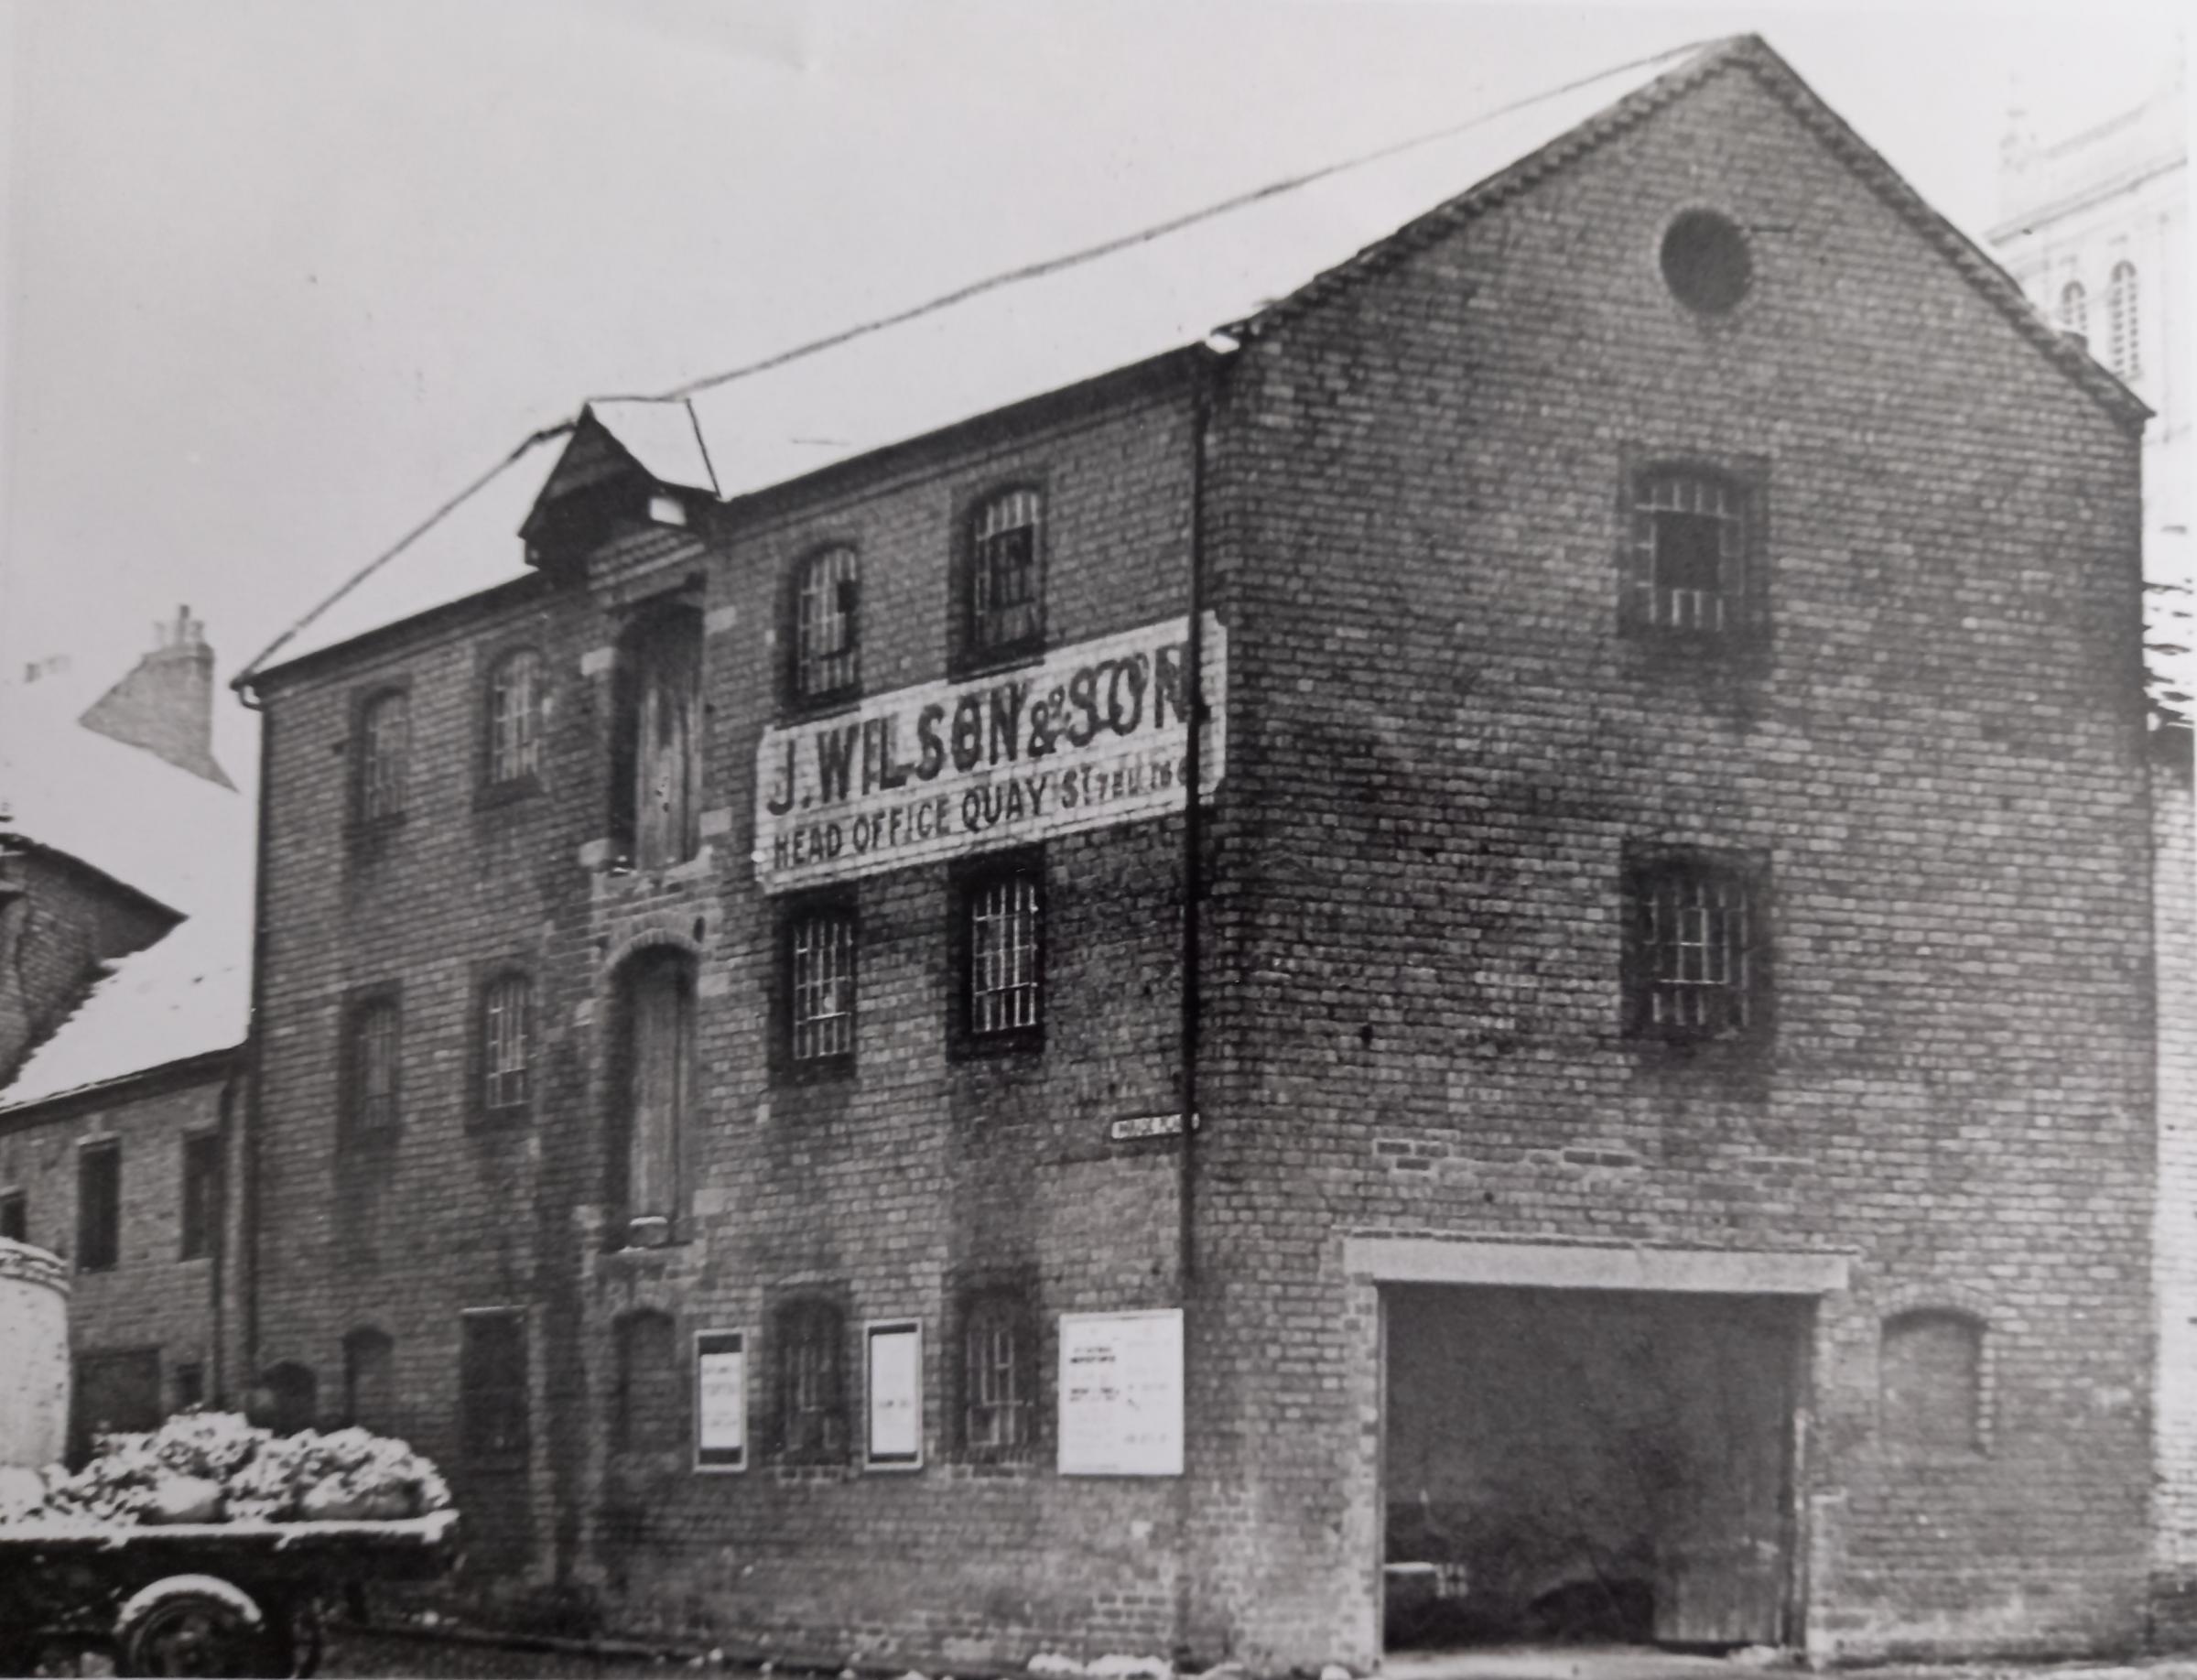 One of the many warehouses in the Quay Street area where goods brought up river were stored